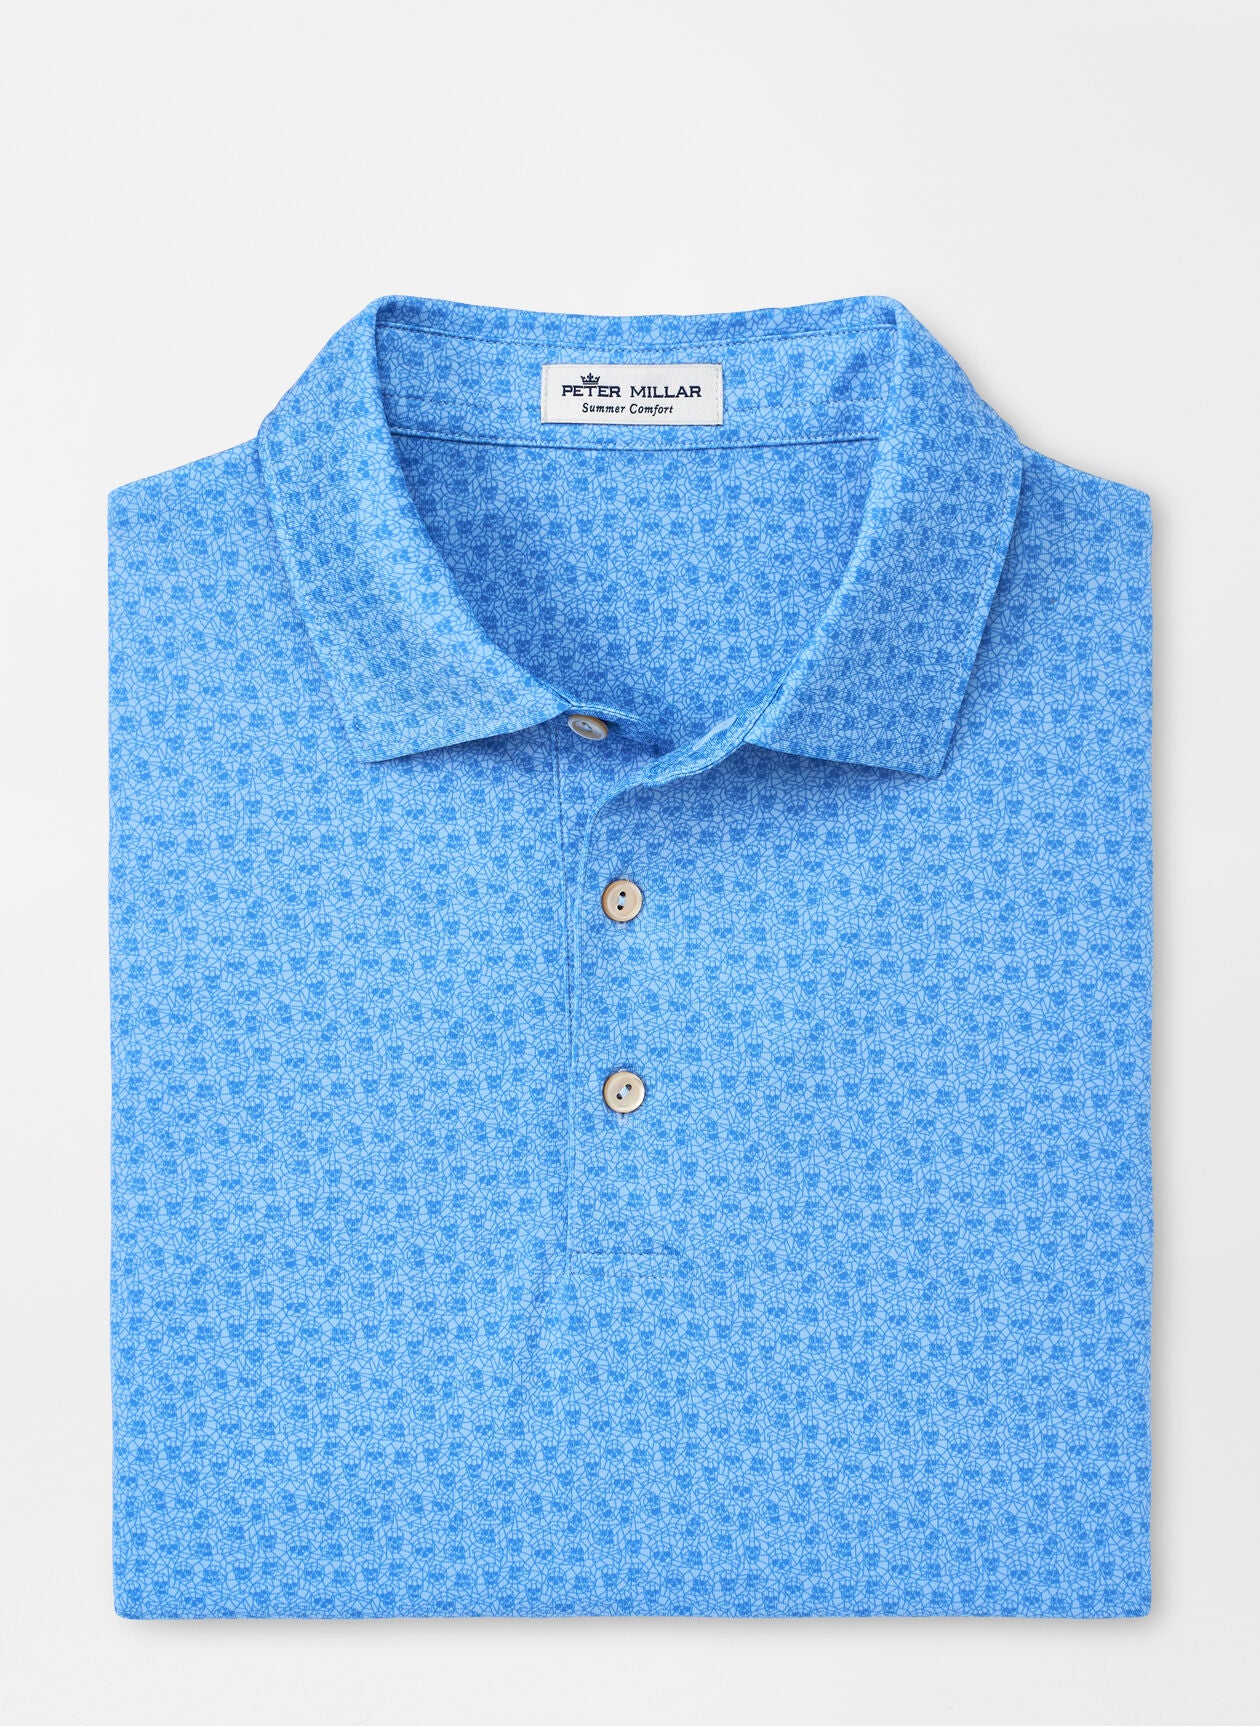 Peter Millar Knock Out Performance Jersey Polo